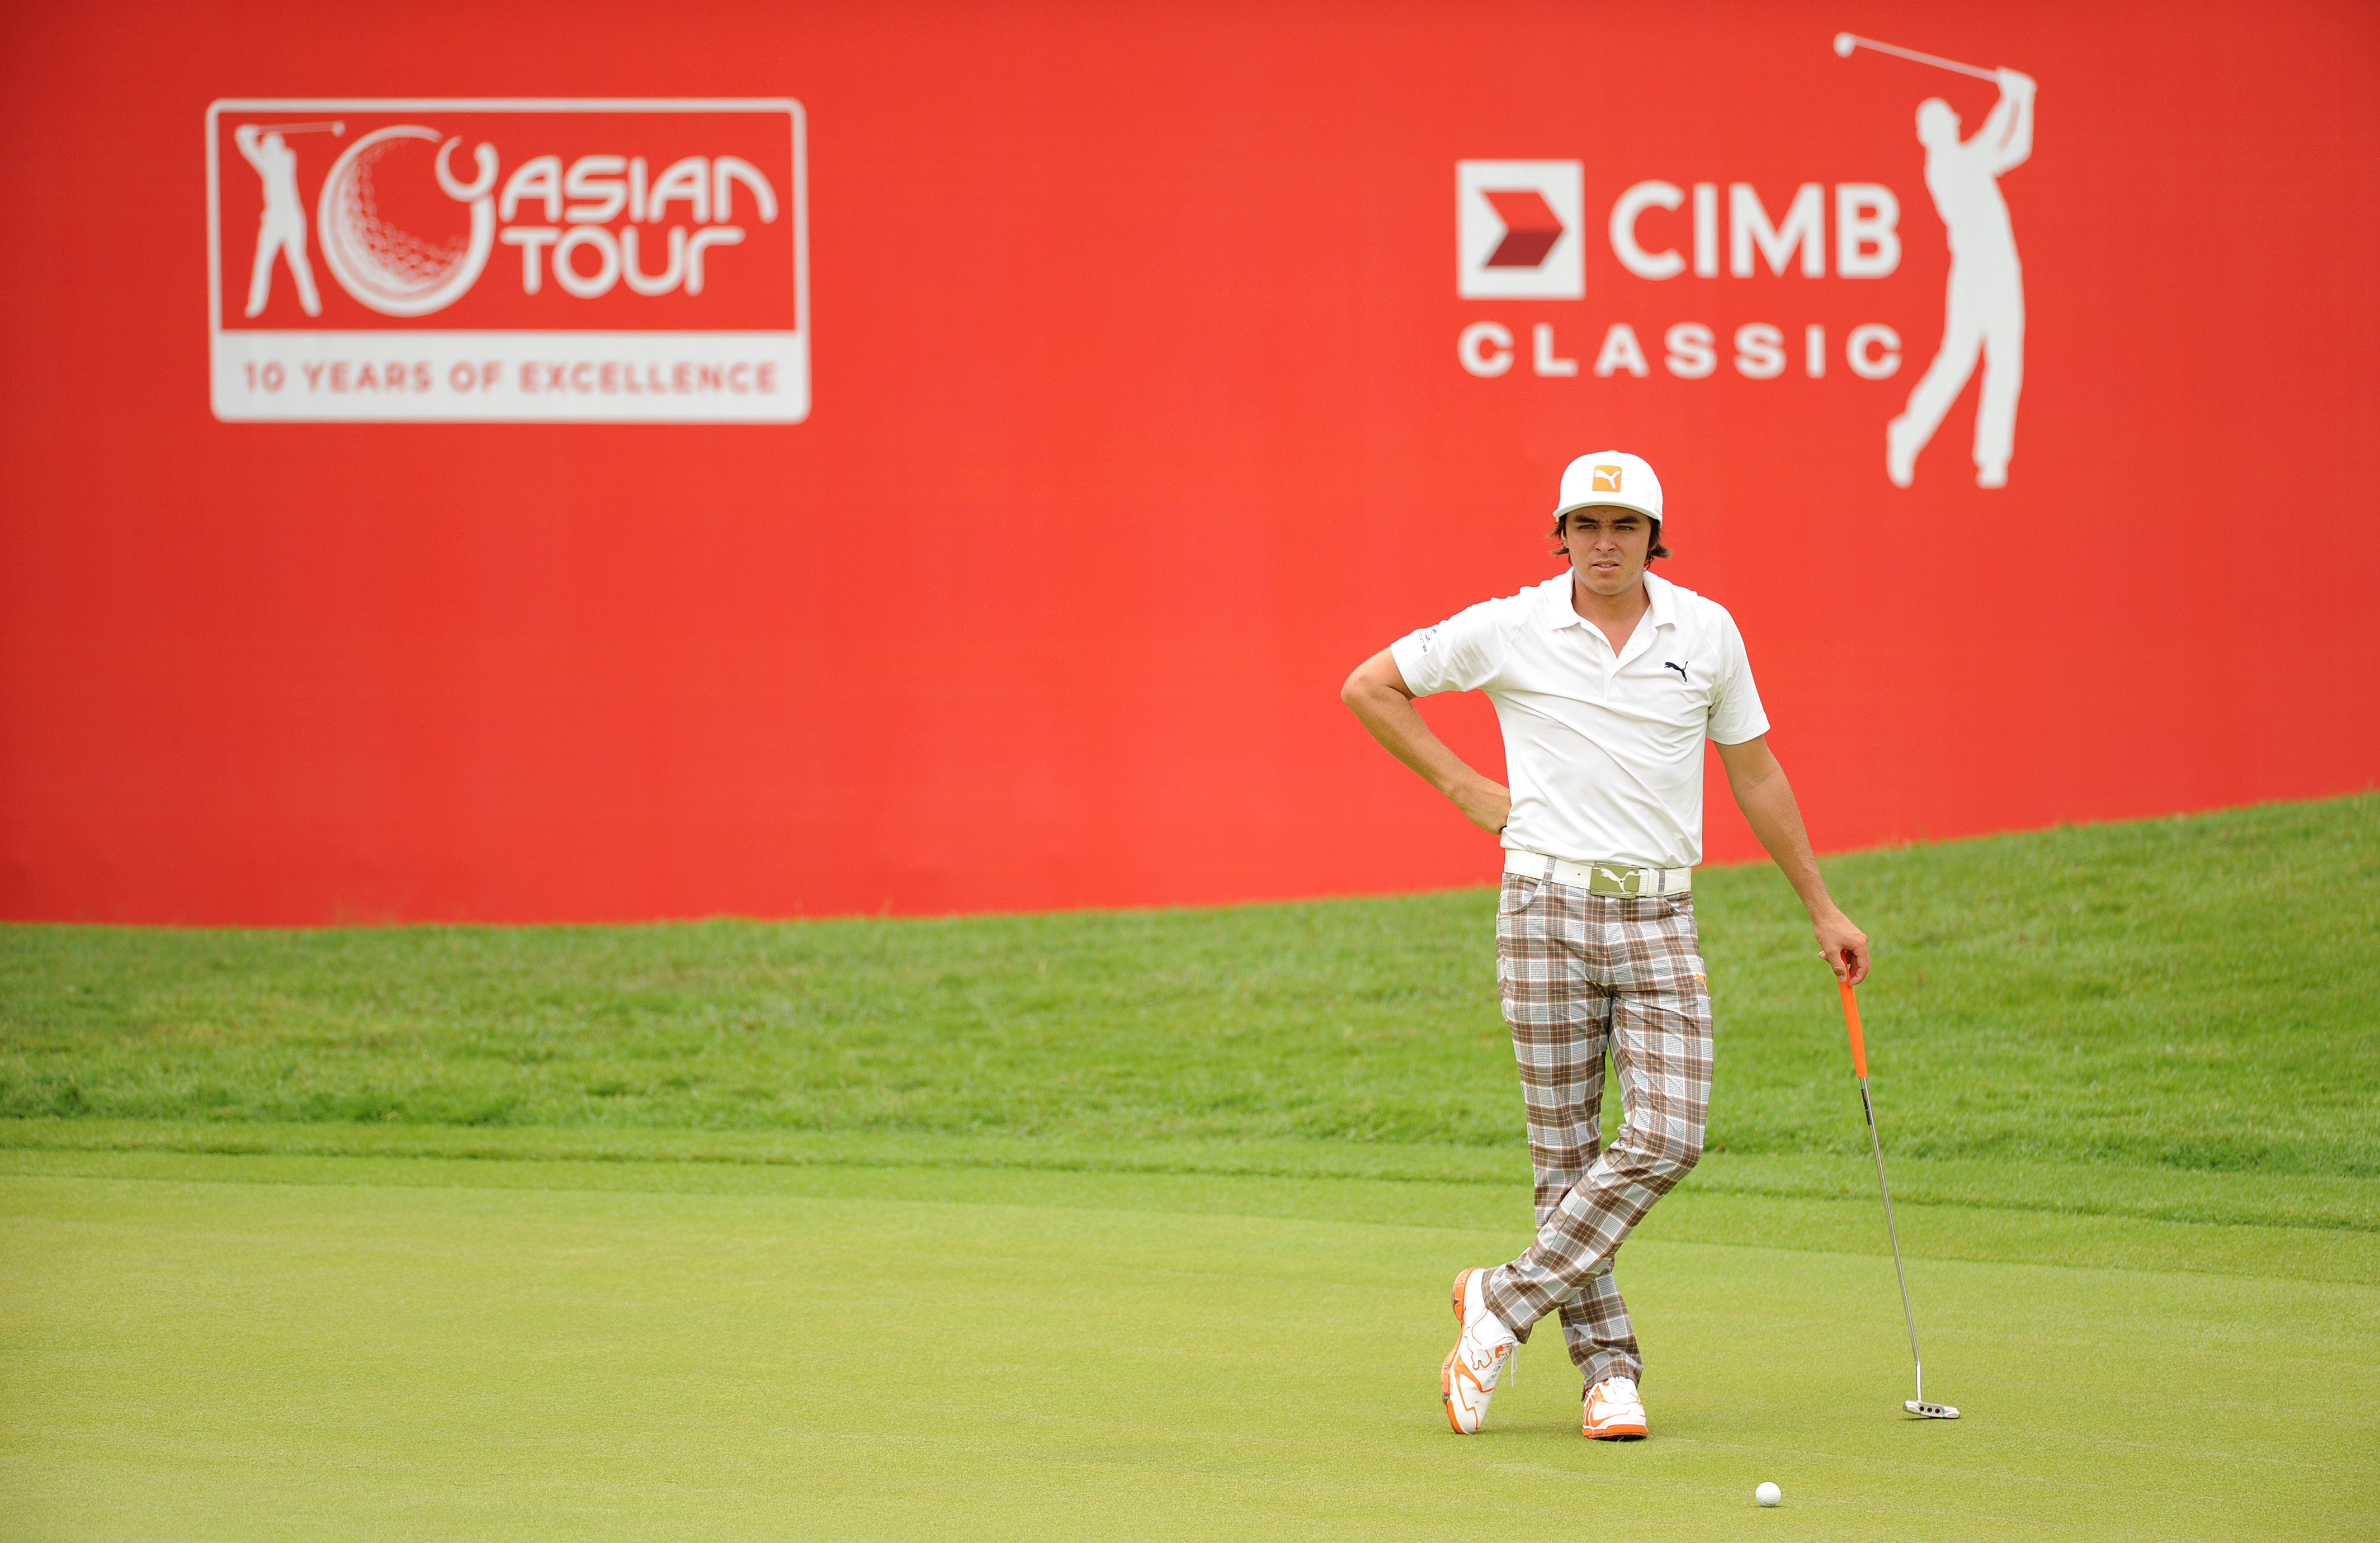 CIMB Classic Preview What They Said Asian Tour Professional